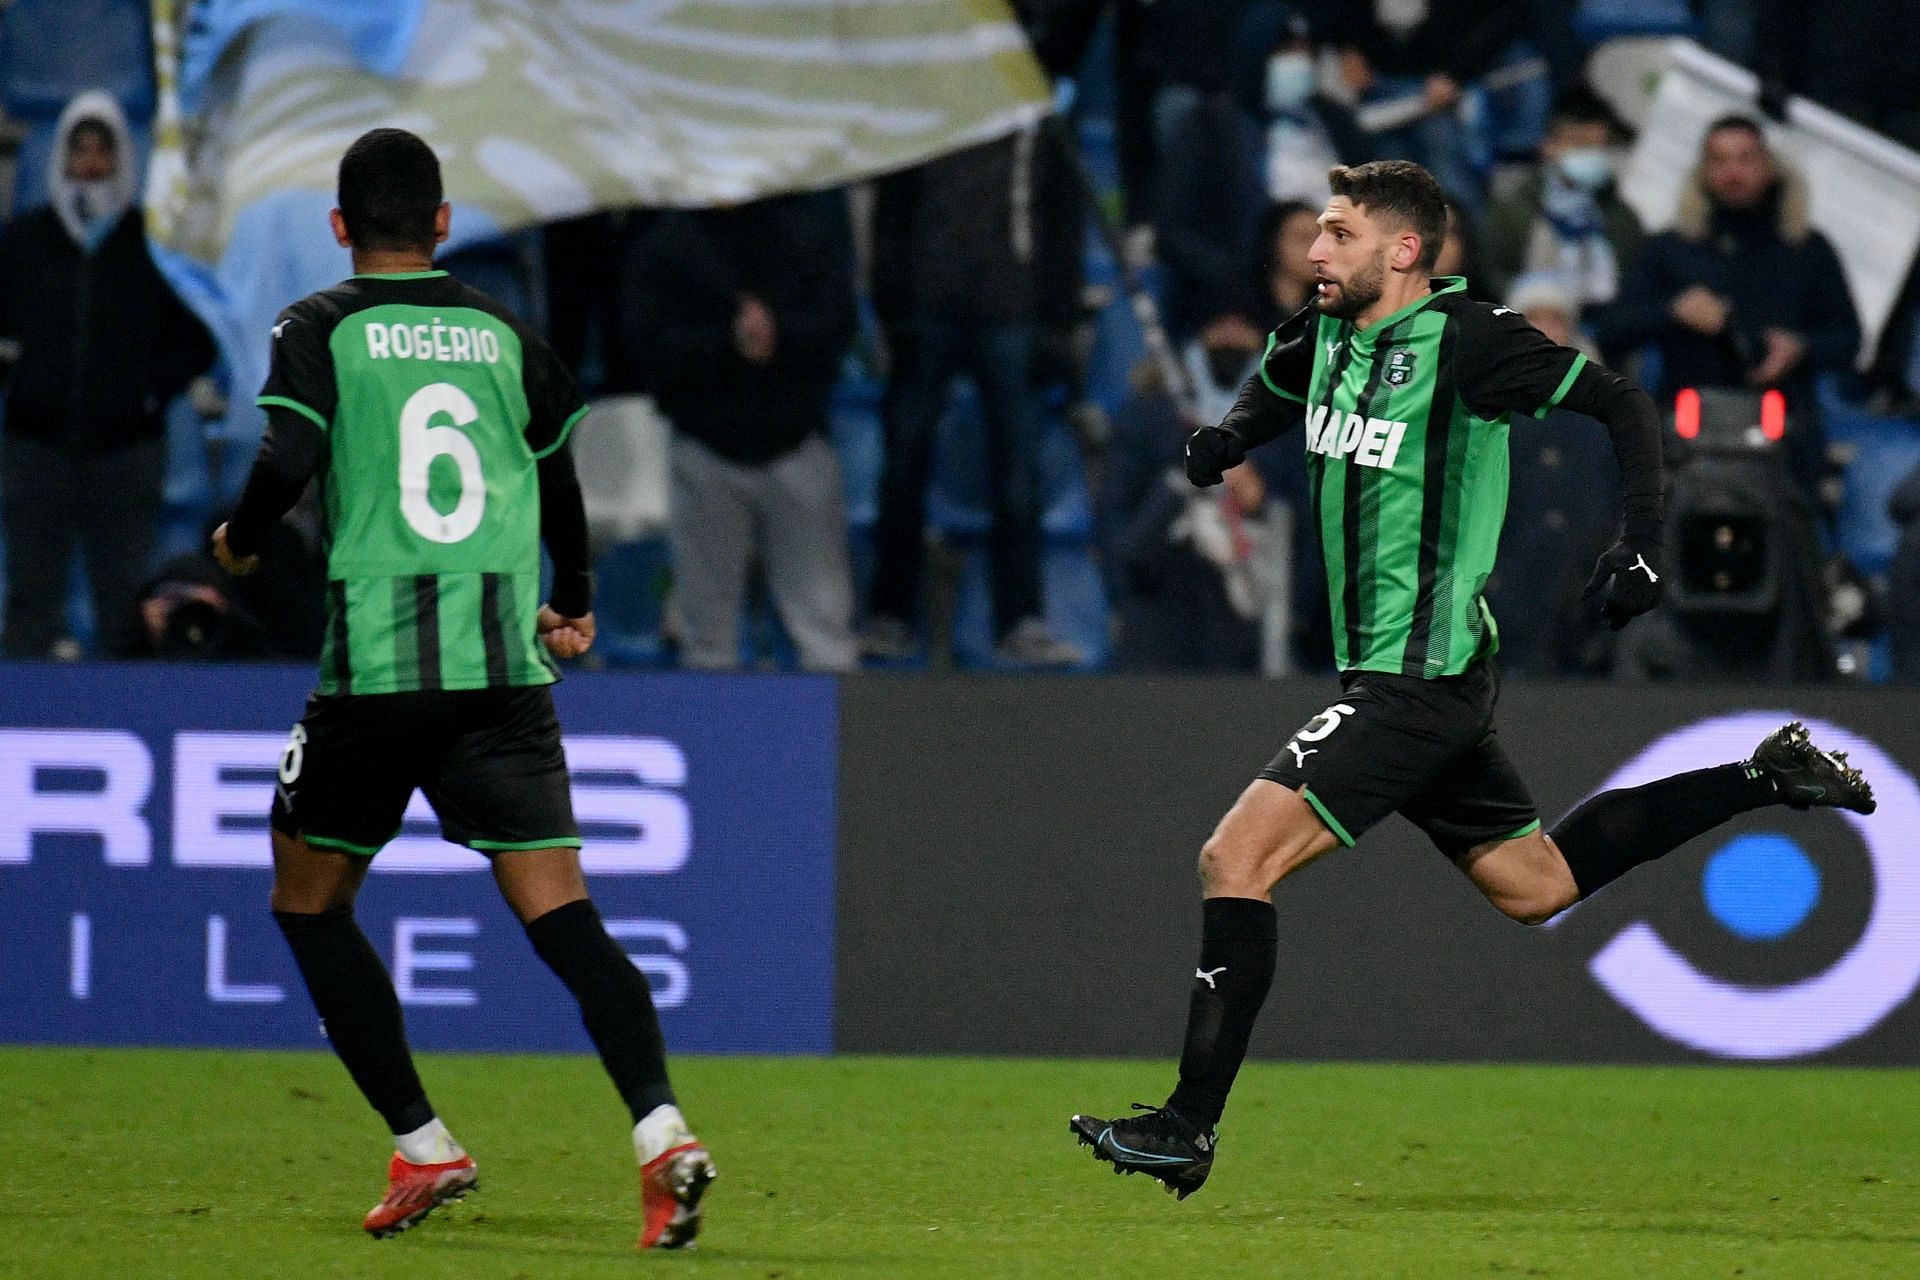 Sassuolo host Bologna in their upcoming Serie A fixture on Wednesday